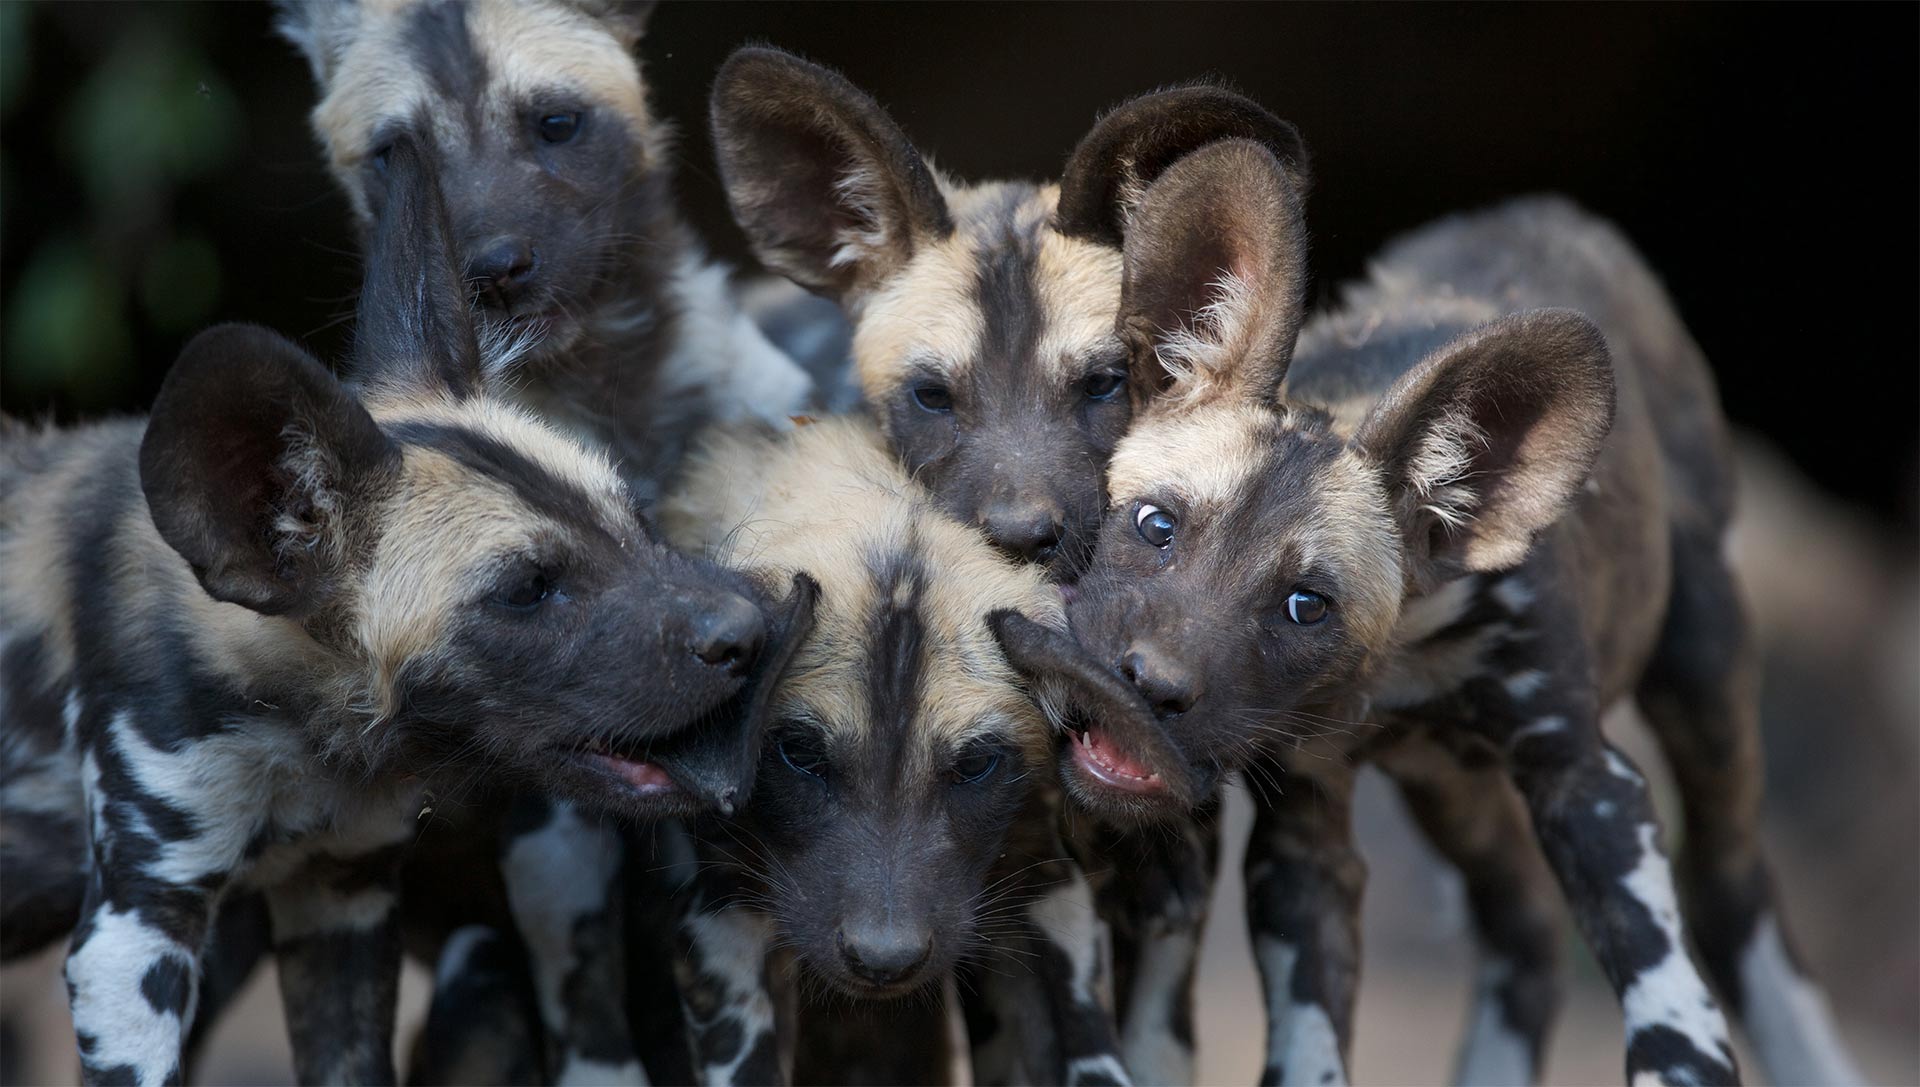 African wild dog pups gang up, biting a sibling’s ears. Malilangwe Wildlife Reserve, Zimbabwe. 